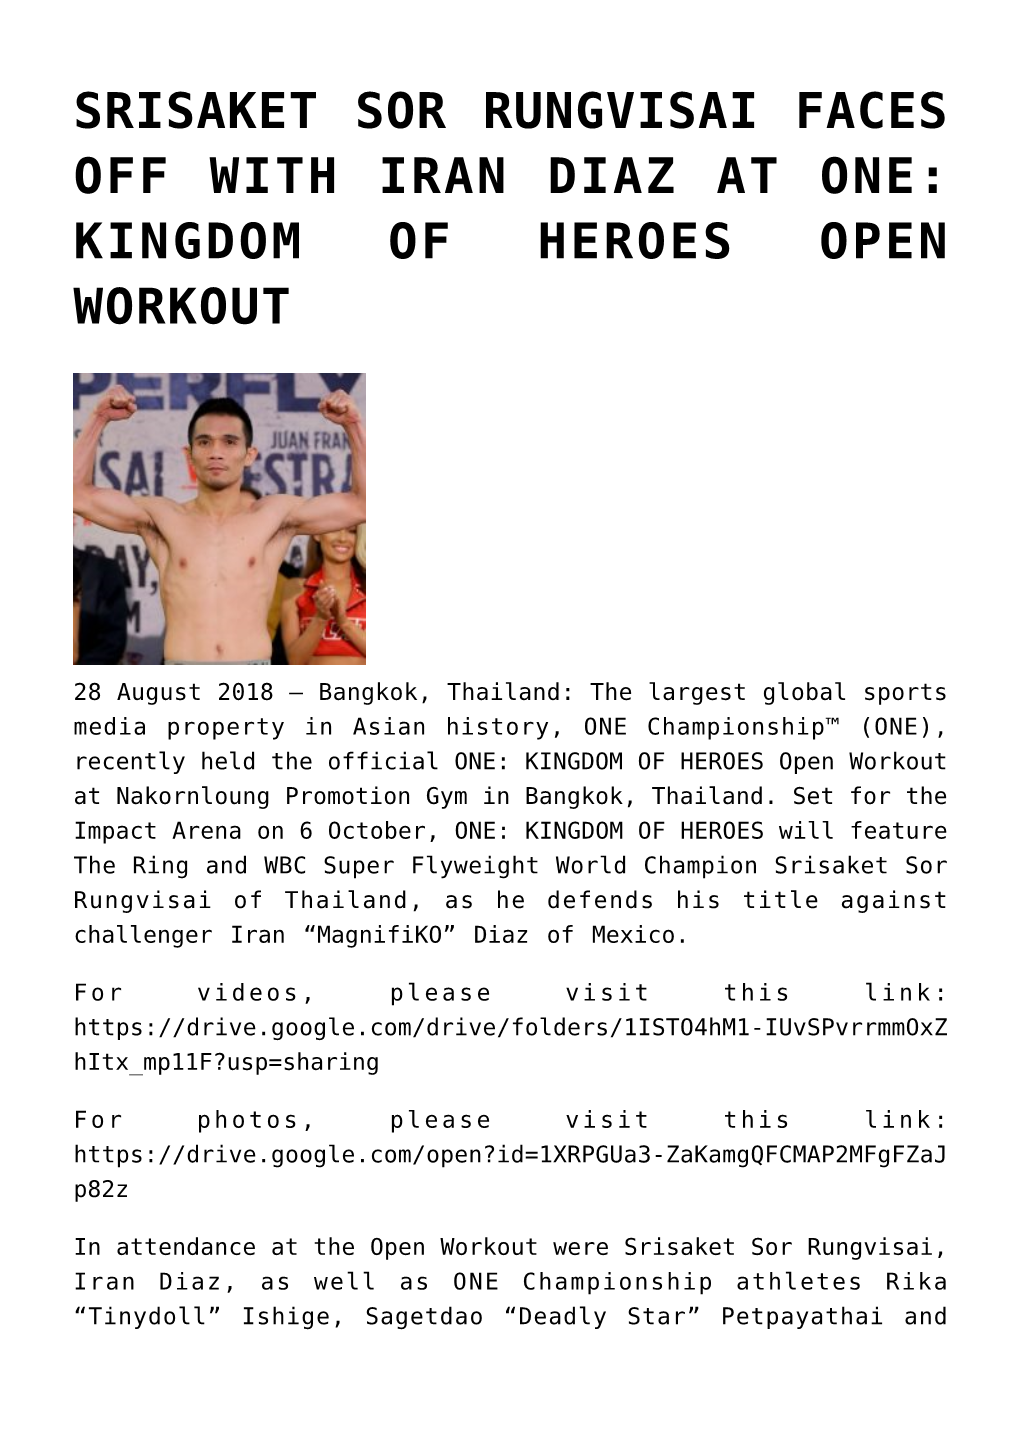 Srisaket Sor Rungvisai Faces Off with Iran Diaz at One: Kingdom of Heroes Open Workout